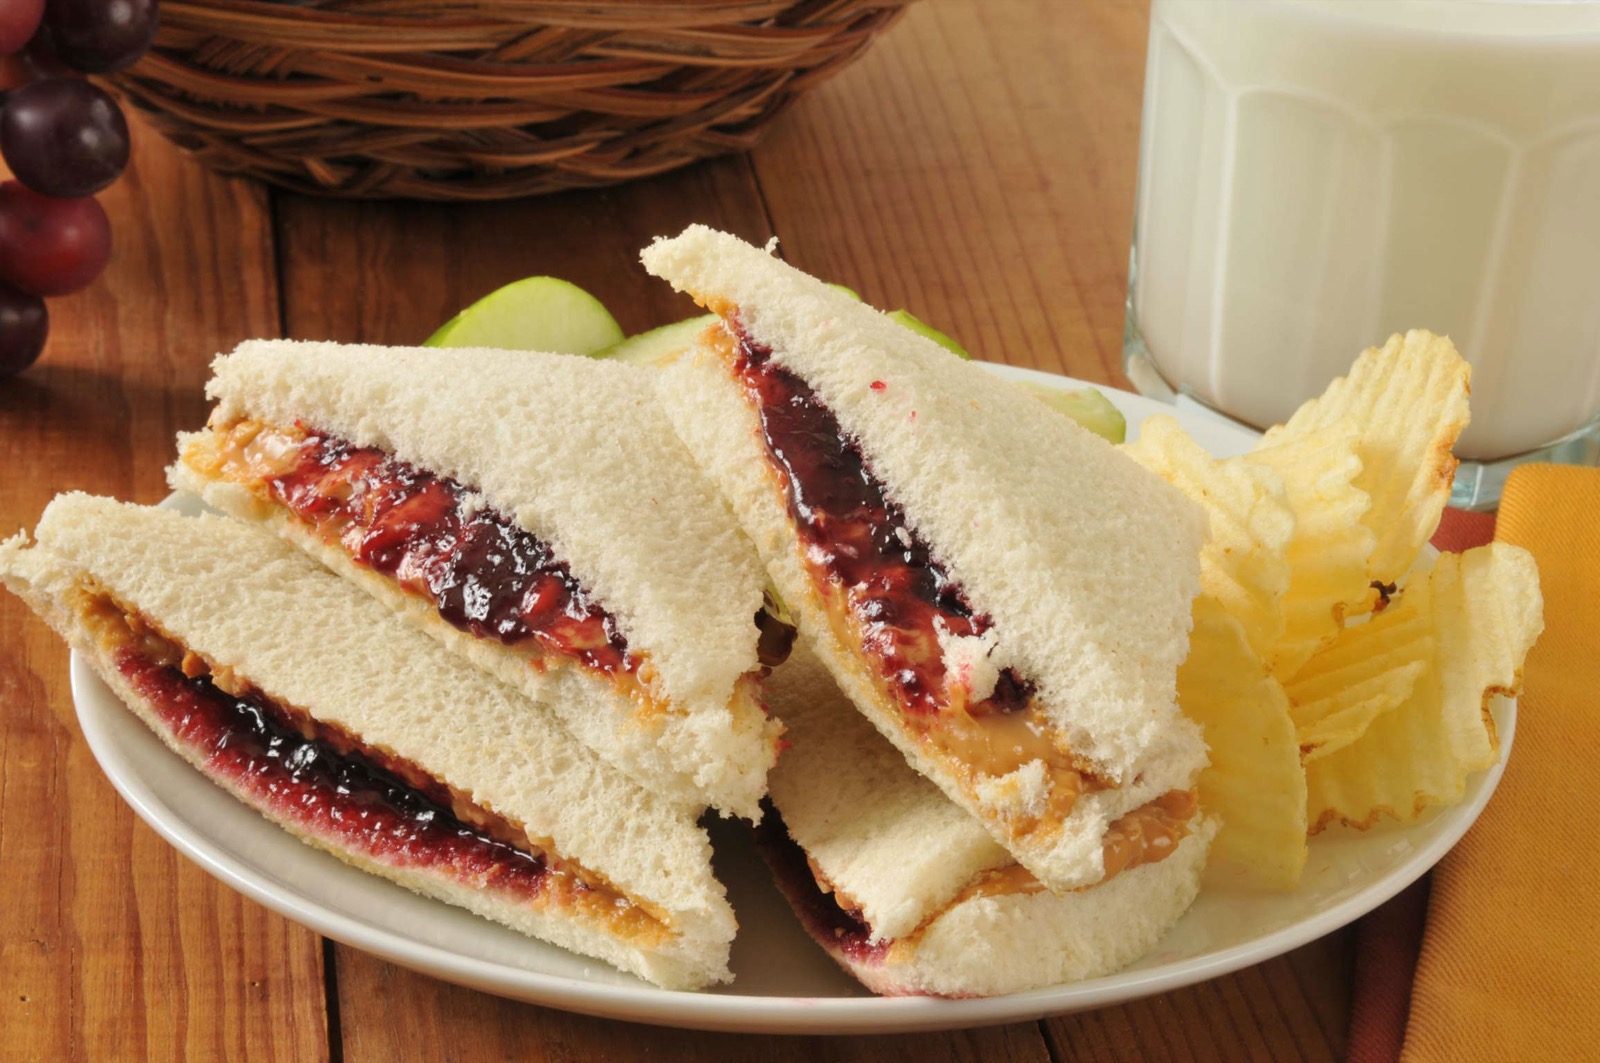 If You Get 14/17 on This Random Trivia Quiz, Then It’s Official: You Are Extremely Knowledgeable Peanut Butter And Jelly Pb&j Sandwich